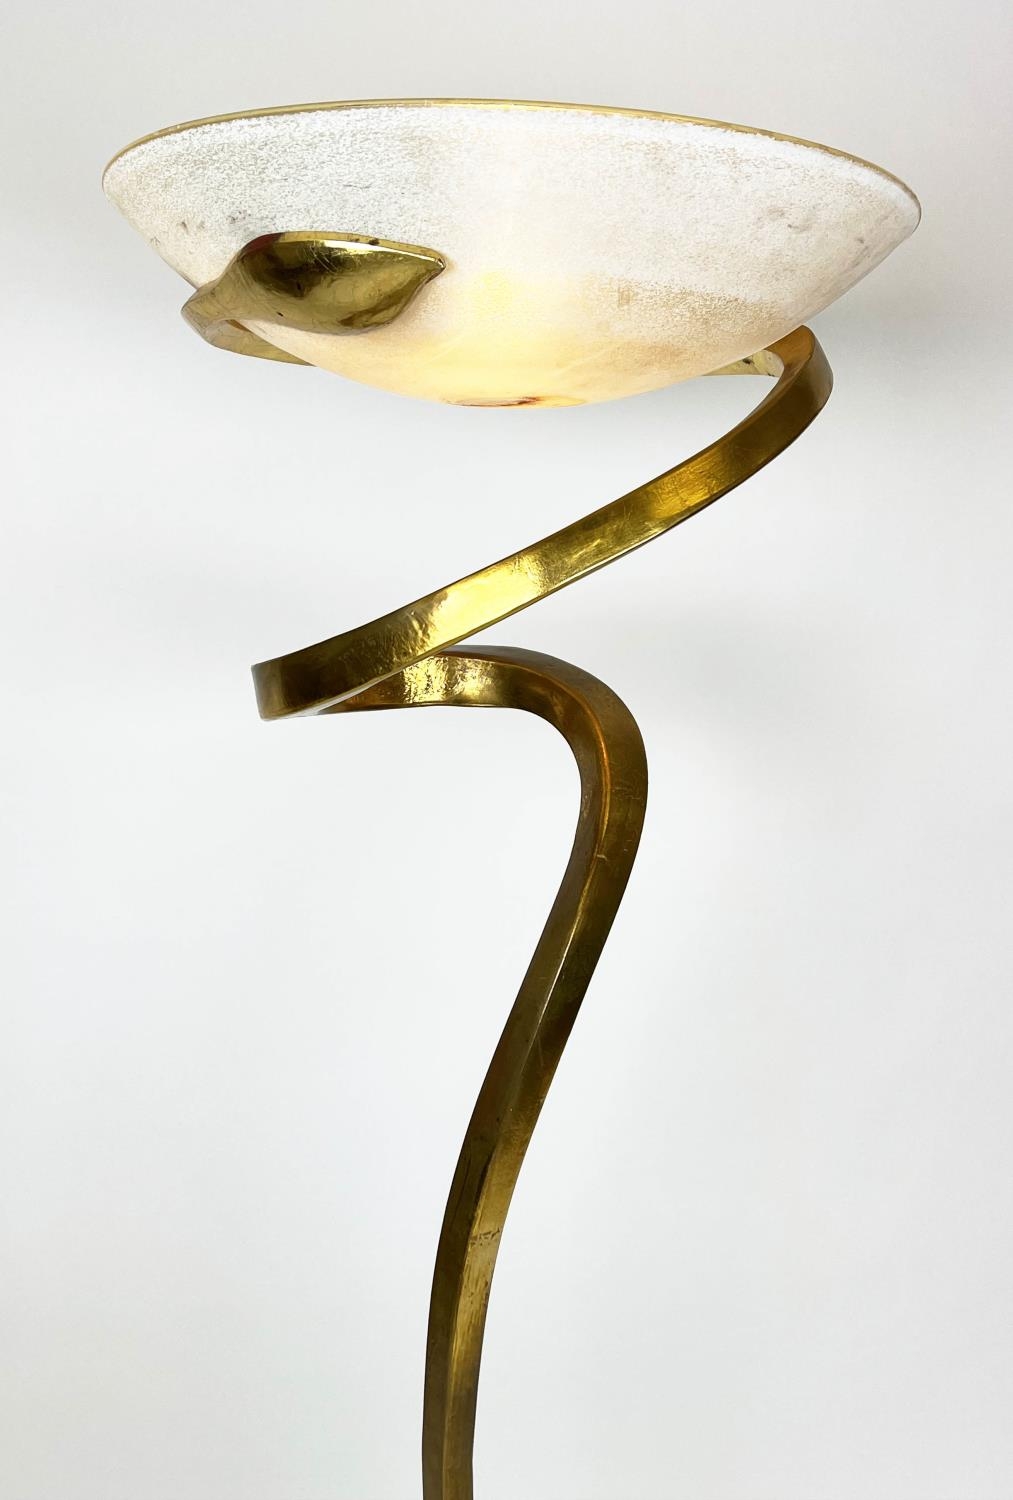 ALFEA FLOOR LAMP, designed by Enzo Ciampalini, circa 1970s, gilt metal with a Murano glass shade, - Image 5 of 5